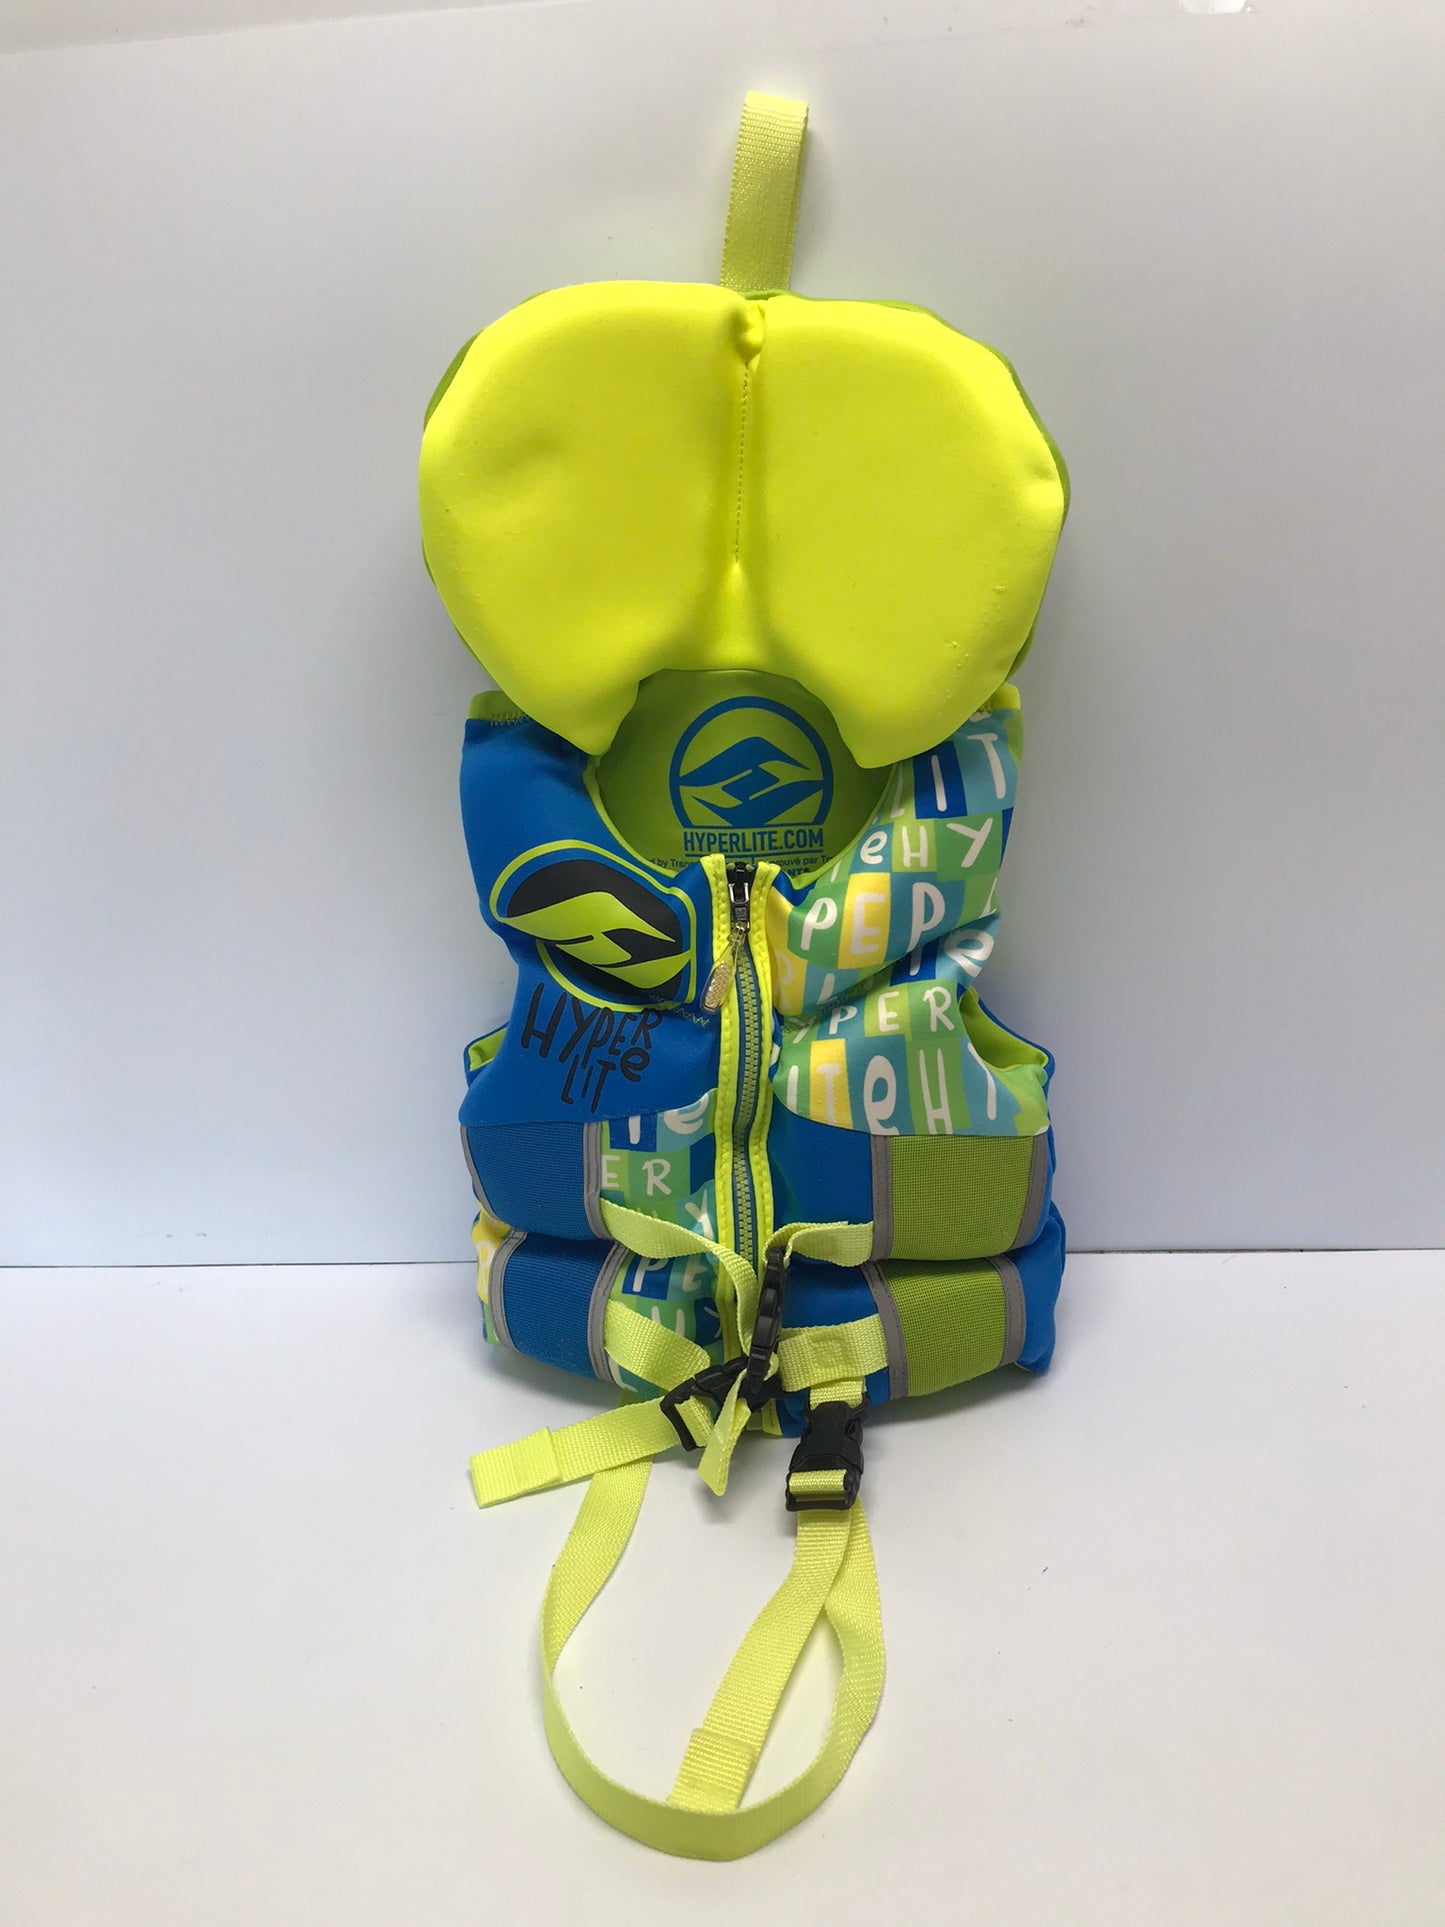 Life Jacket Child Size 30-60lbs Neoprene Hyper Lite Lime Blue Transport Canada Approved Like New